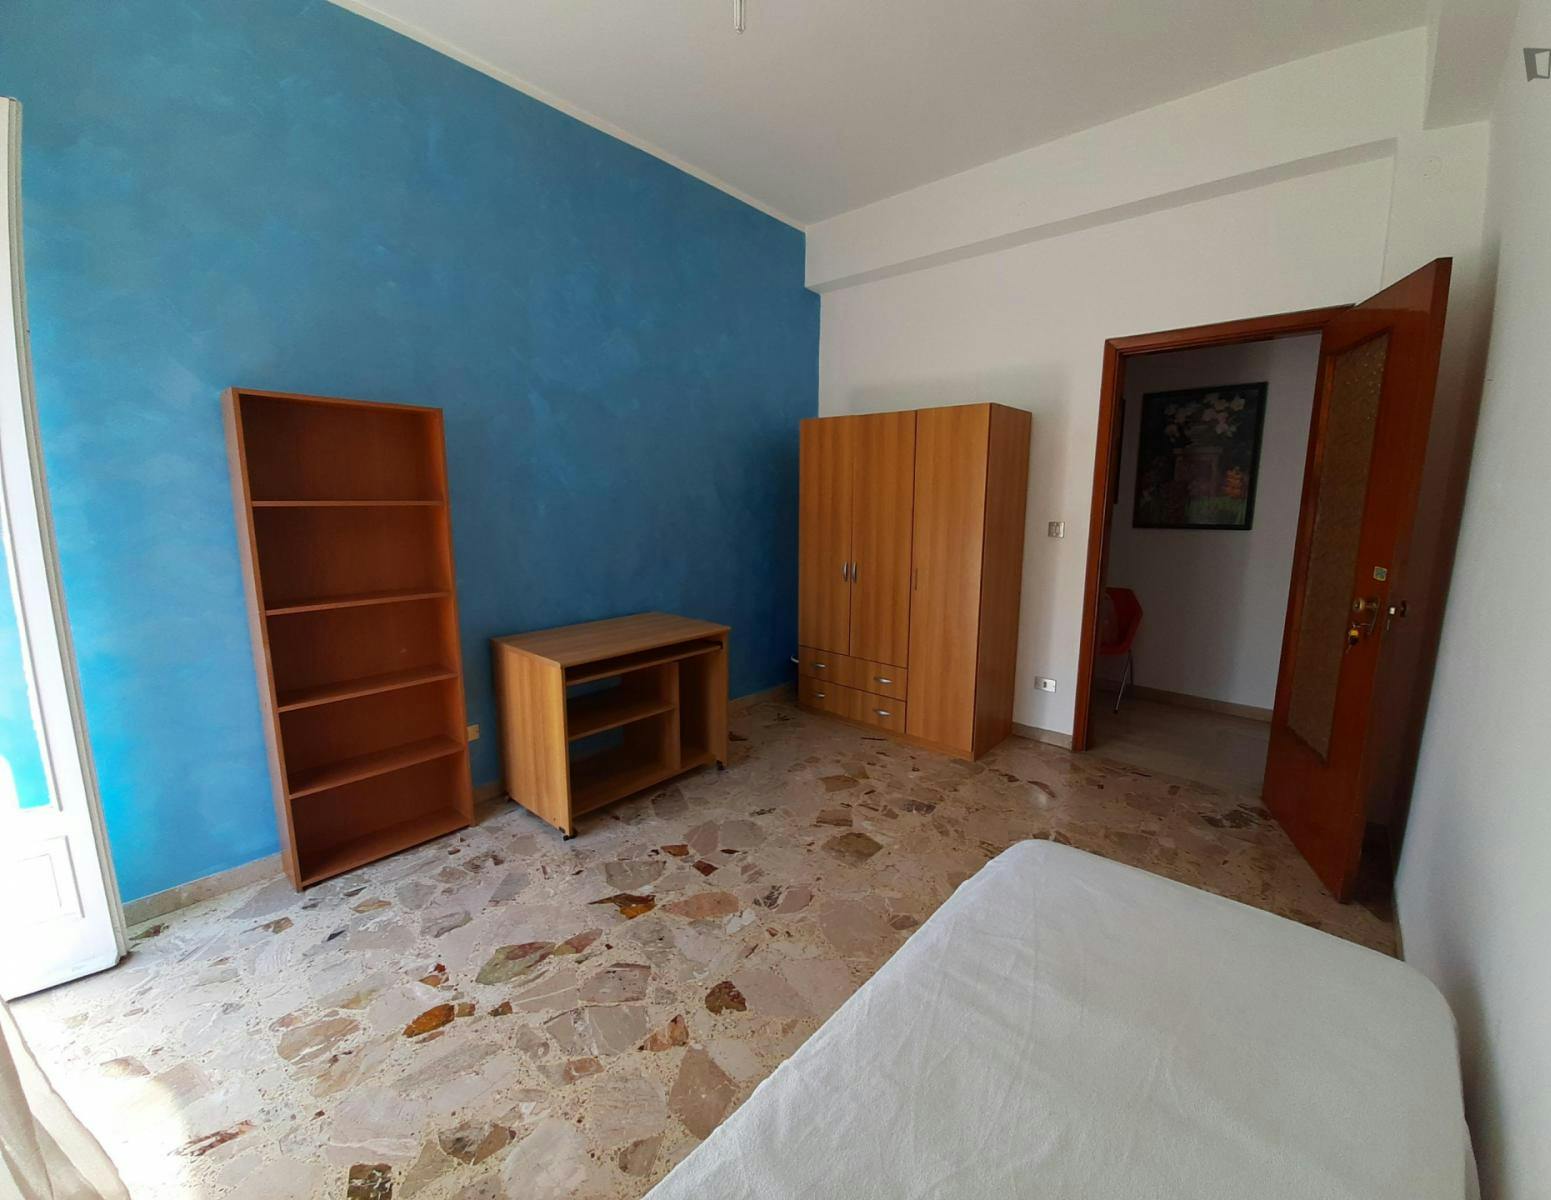 Welcoming Single bedroom, with balcony, in 4-bedroom apartment close to the center